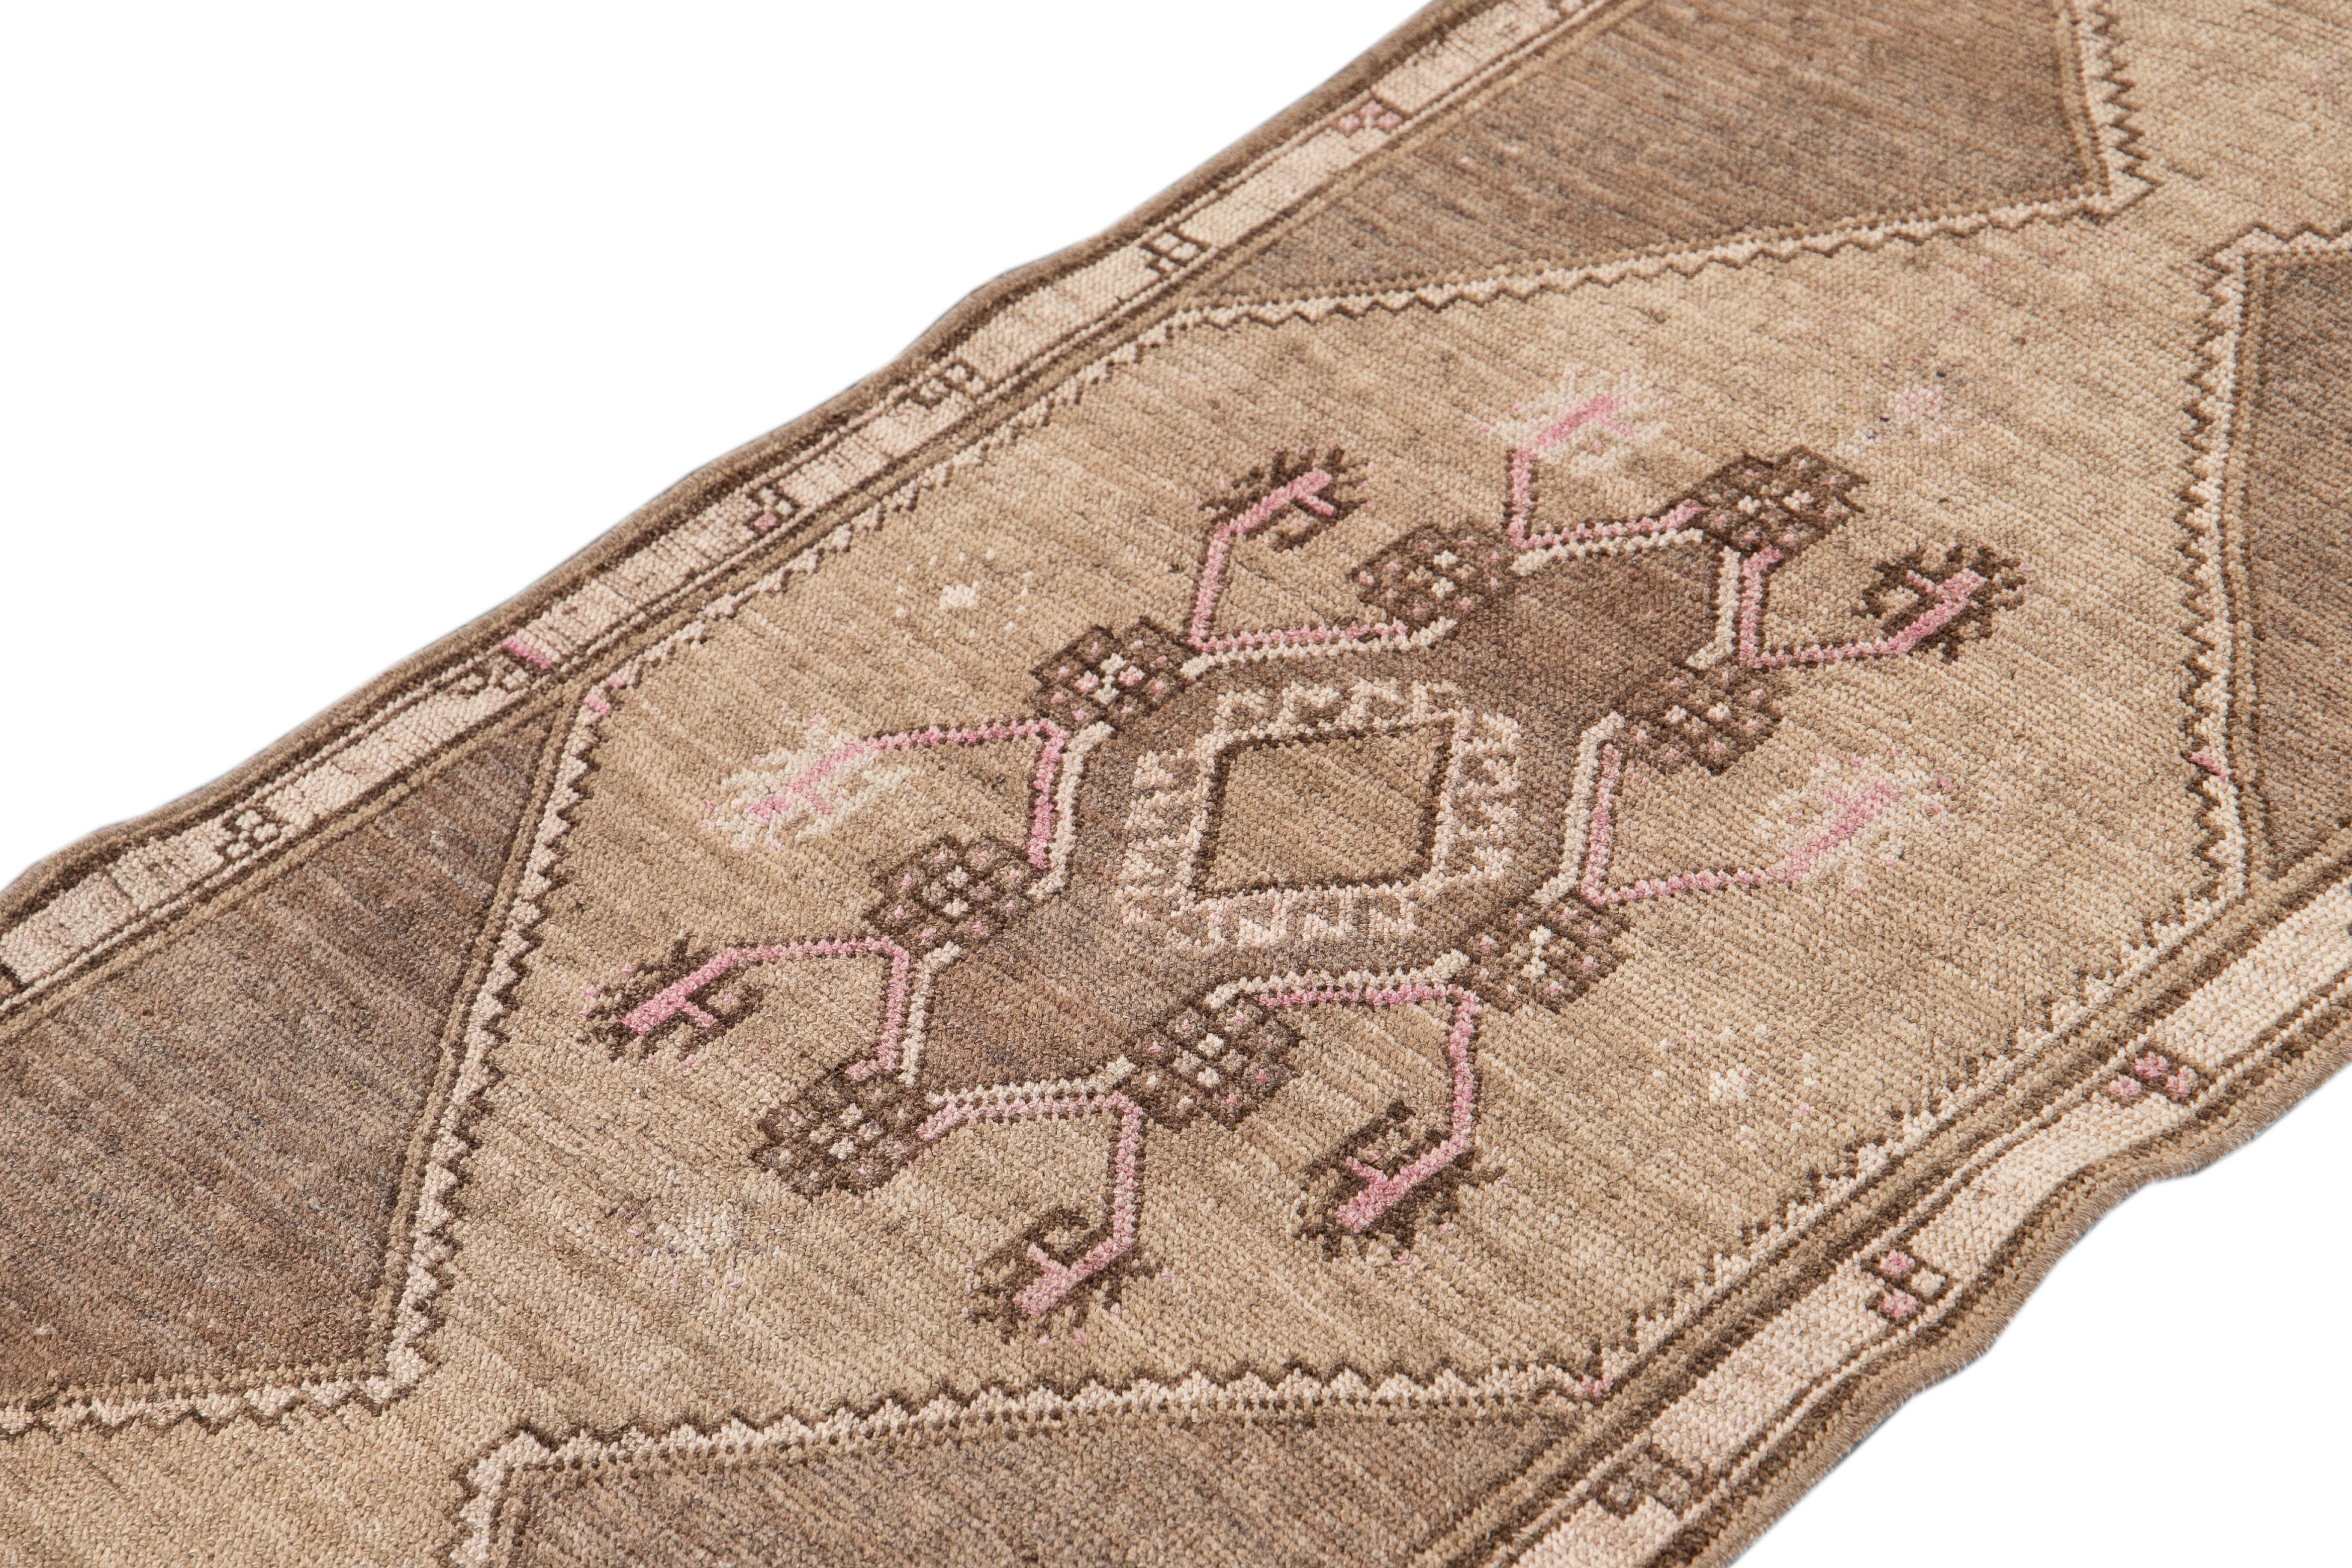 Beautiful antique runner rug, with a dark tan field, brown and pink accents in an all-over multi medallion geometric design.

This rug measures: 2' 8